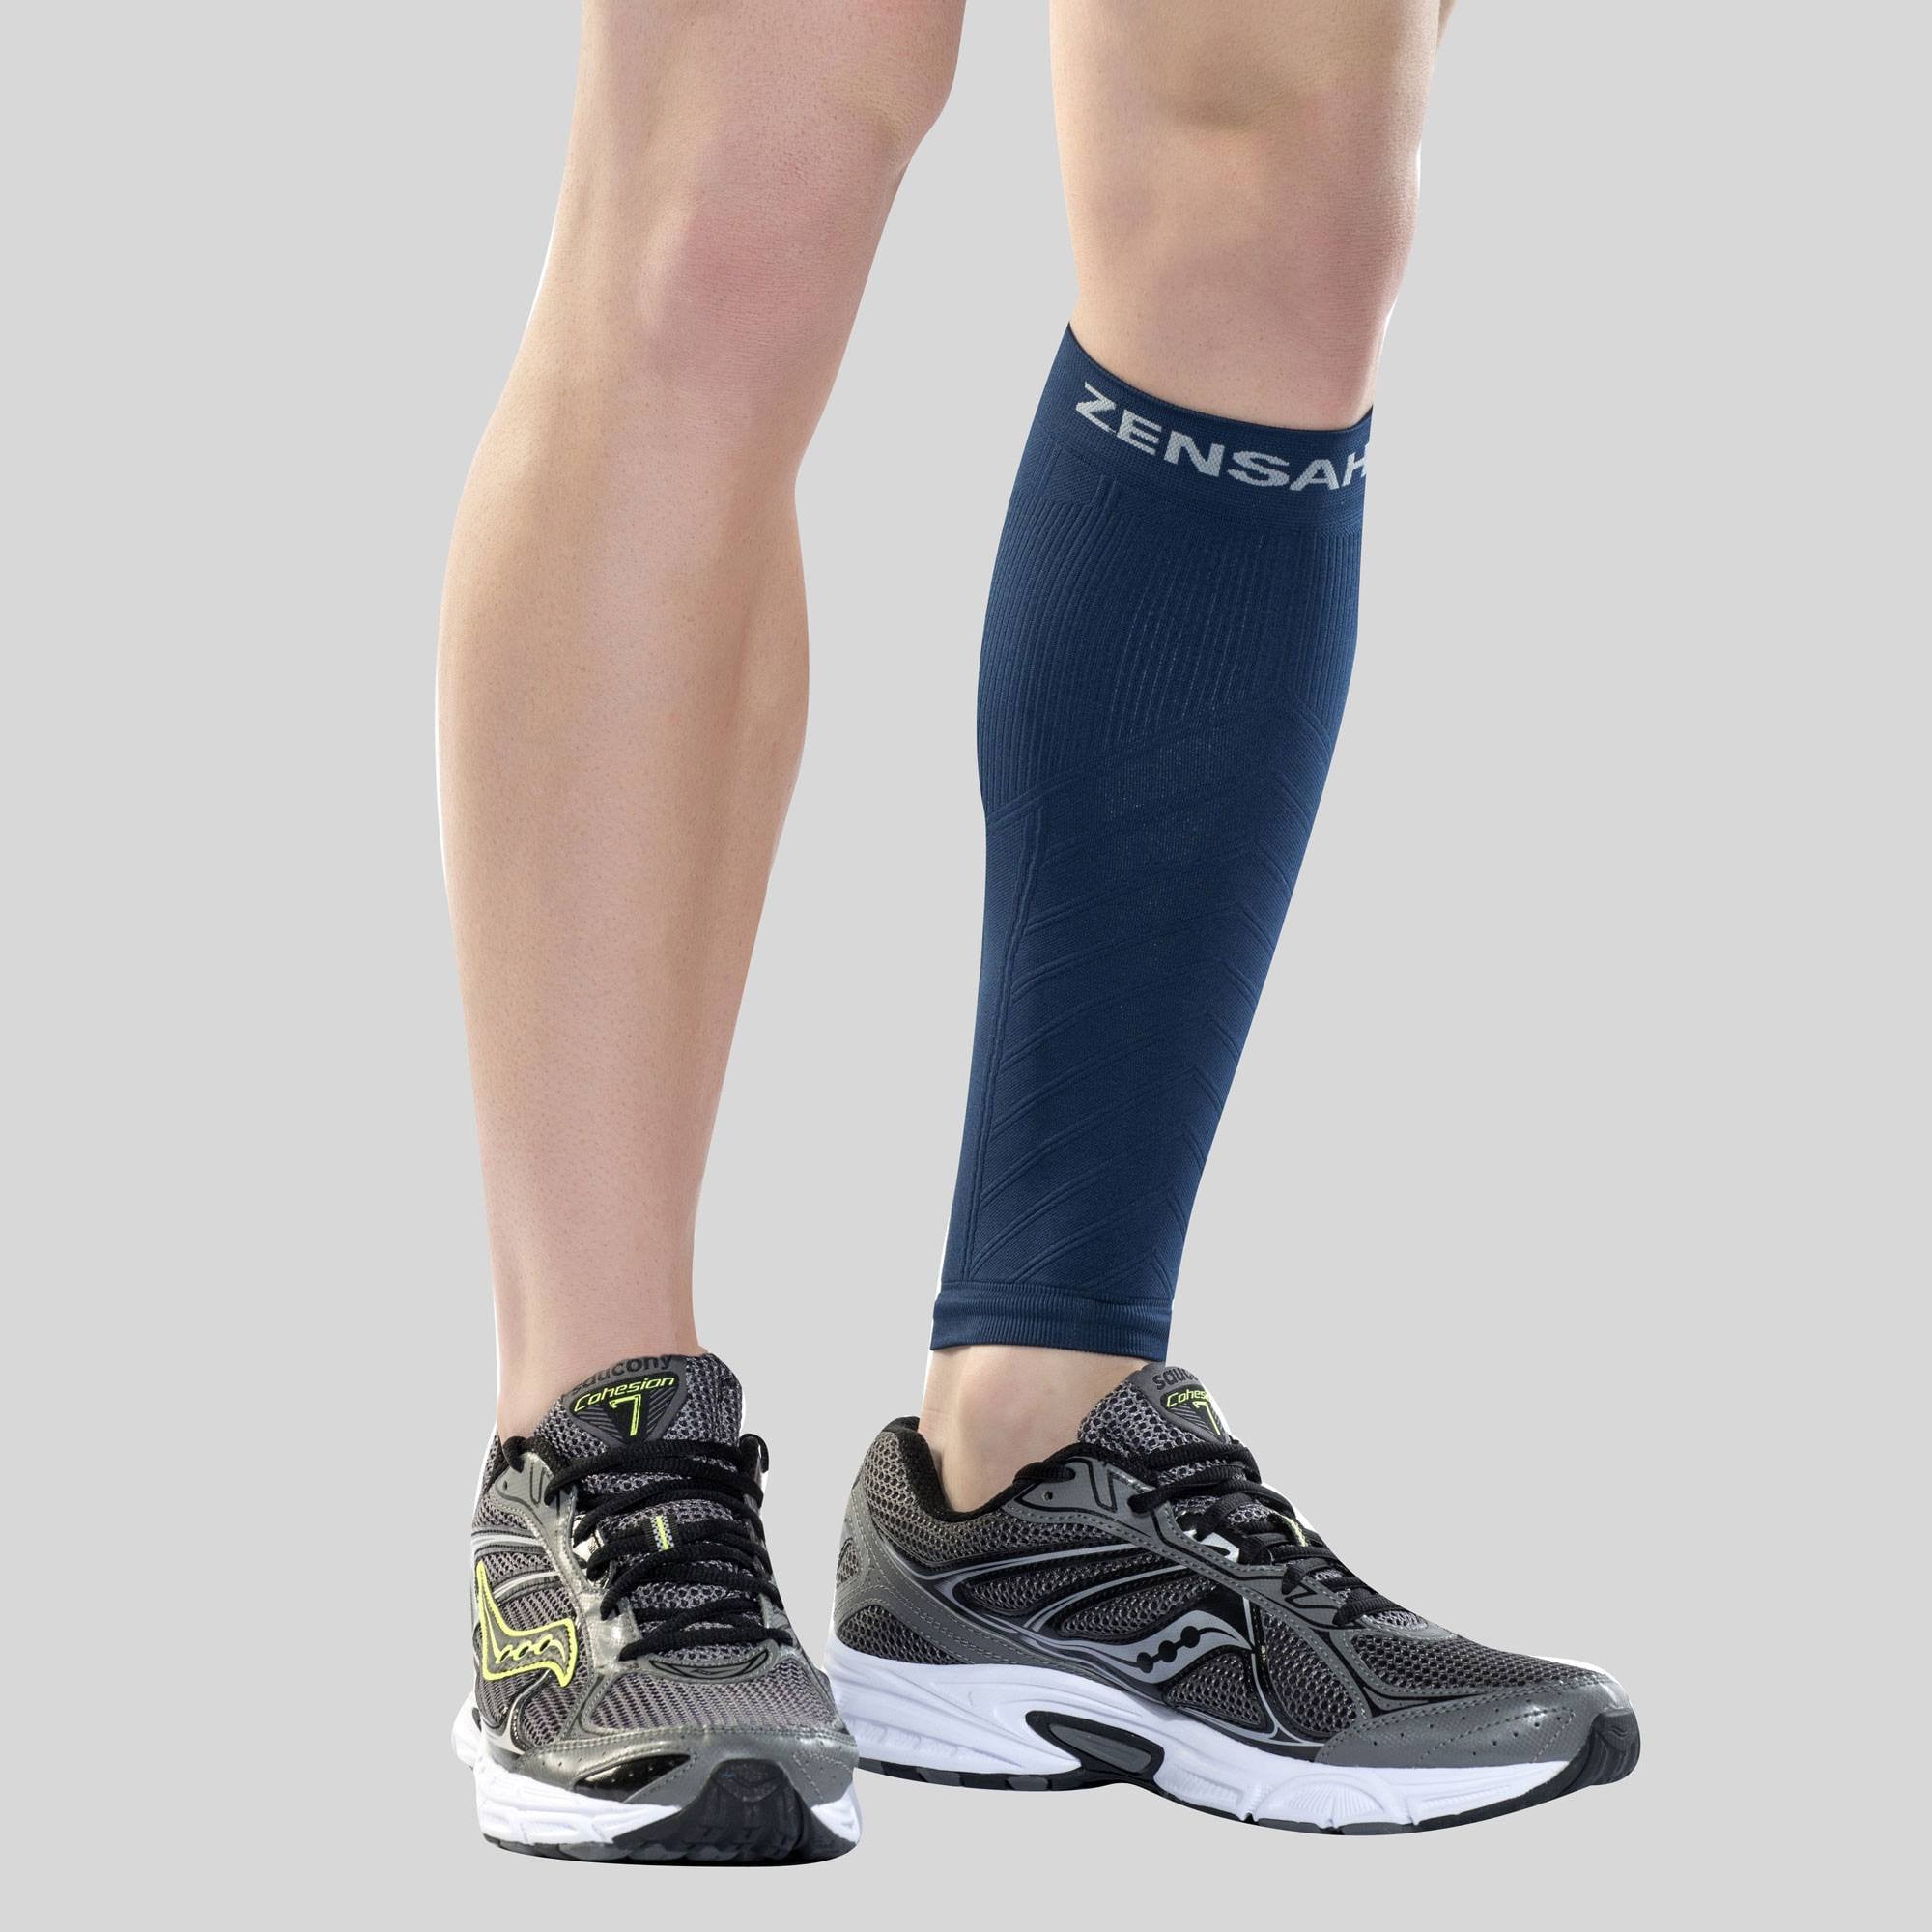 Compression Ankle / Calf Sleeves  Calf sleeve, Compression leg sleeves,  Ankle sleeve